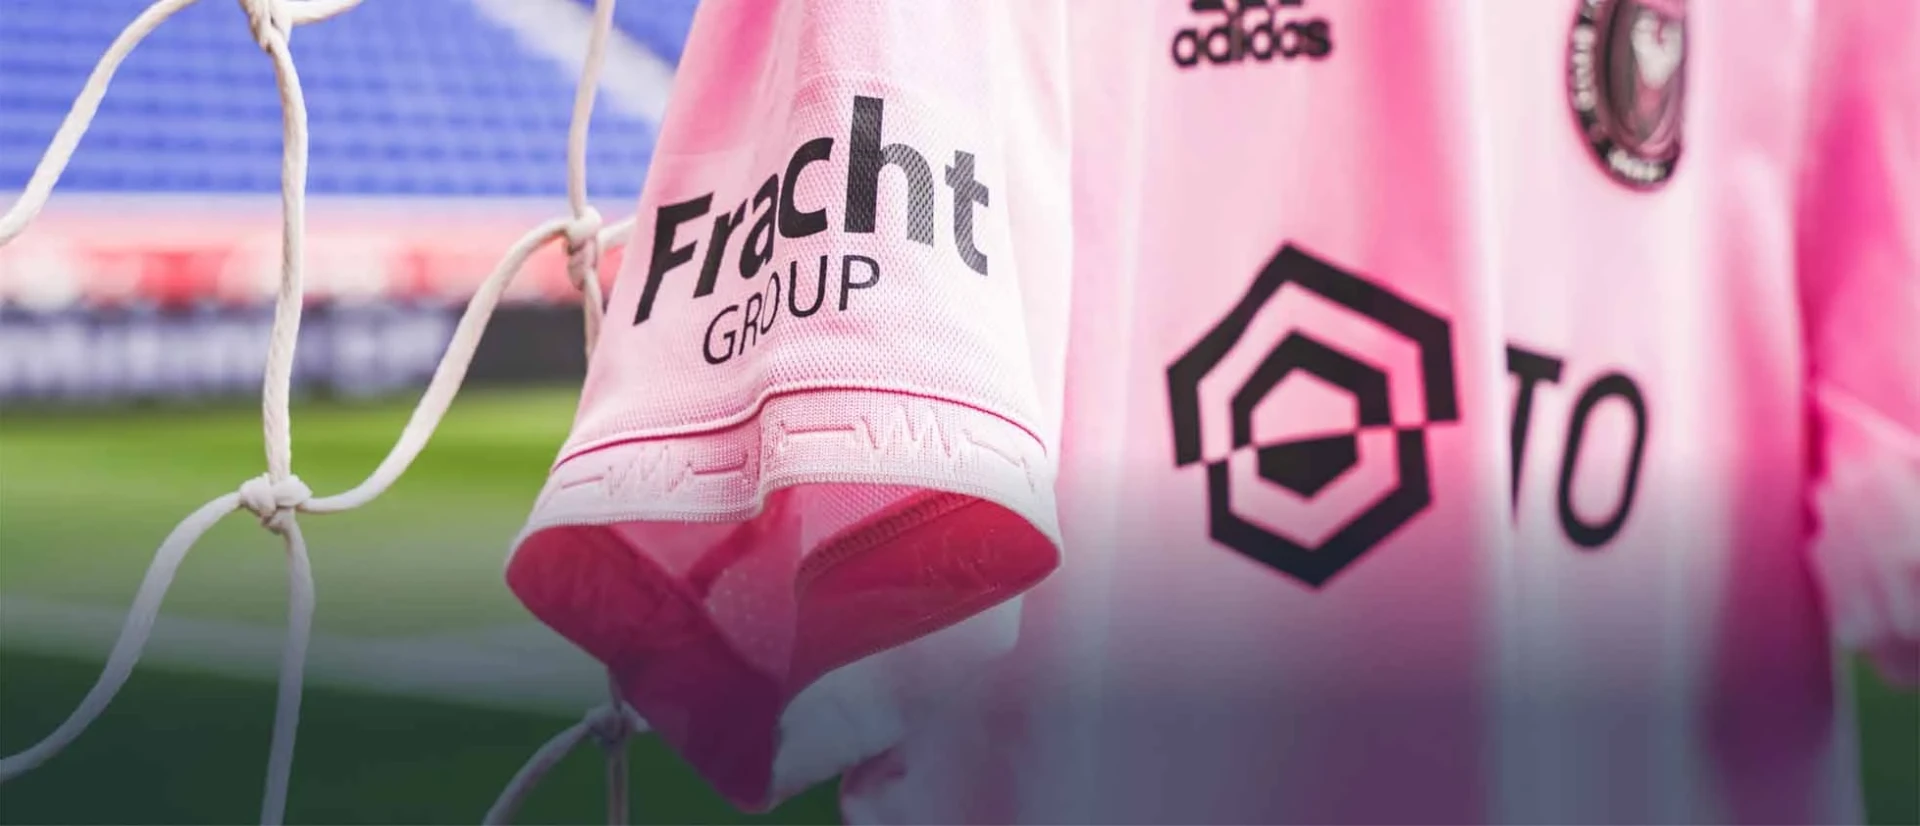 Close up view of an Inter Miami FC kit hanging on the goal netting with the Fracht Group logo shown prominently on the sleeve.